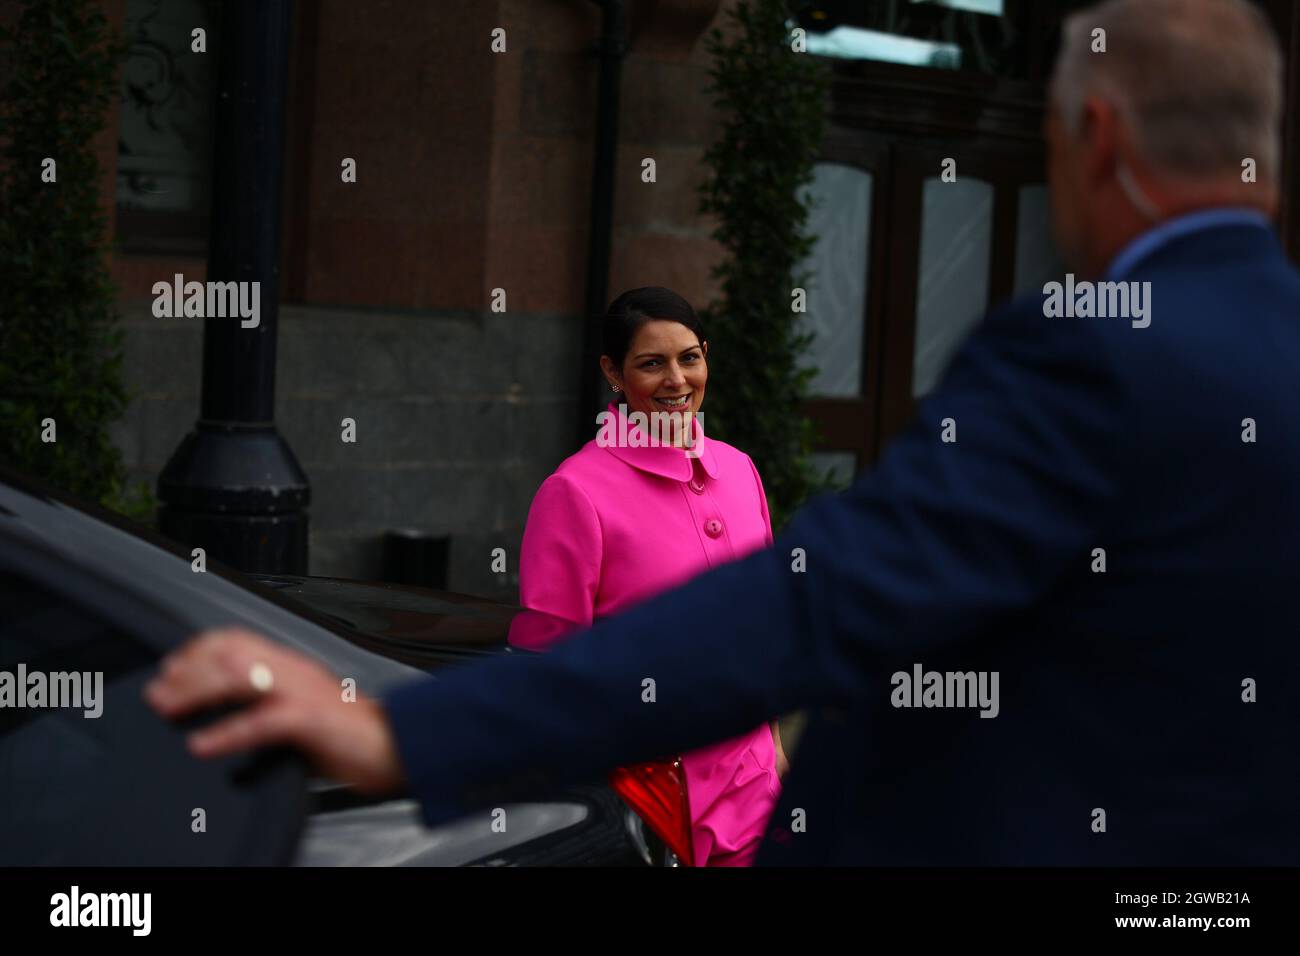 Pritti Patel exits the Midland Hotel in Manchester, United Kingdom on 10/3/2021. (Photo by Ryan Jenkinson/News Images/Sipa USA) Stock Photo